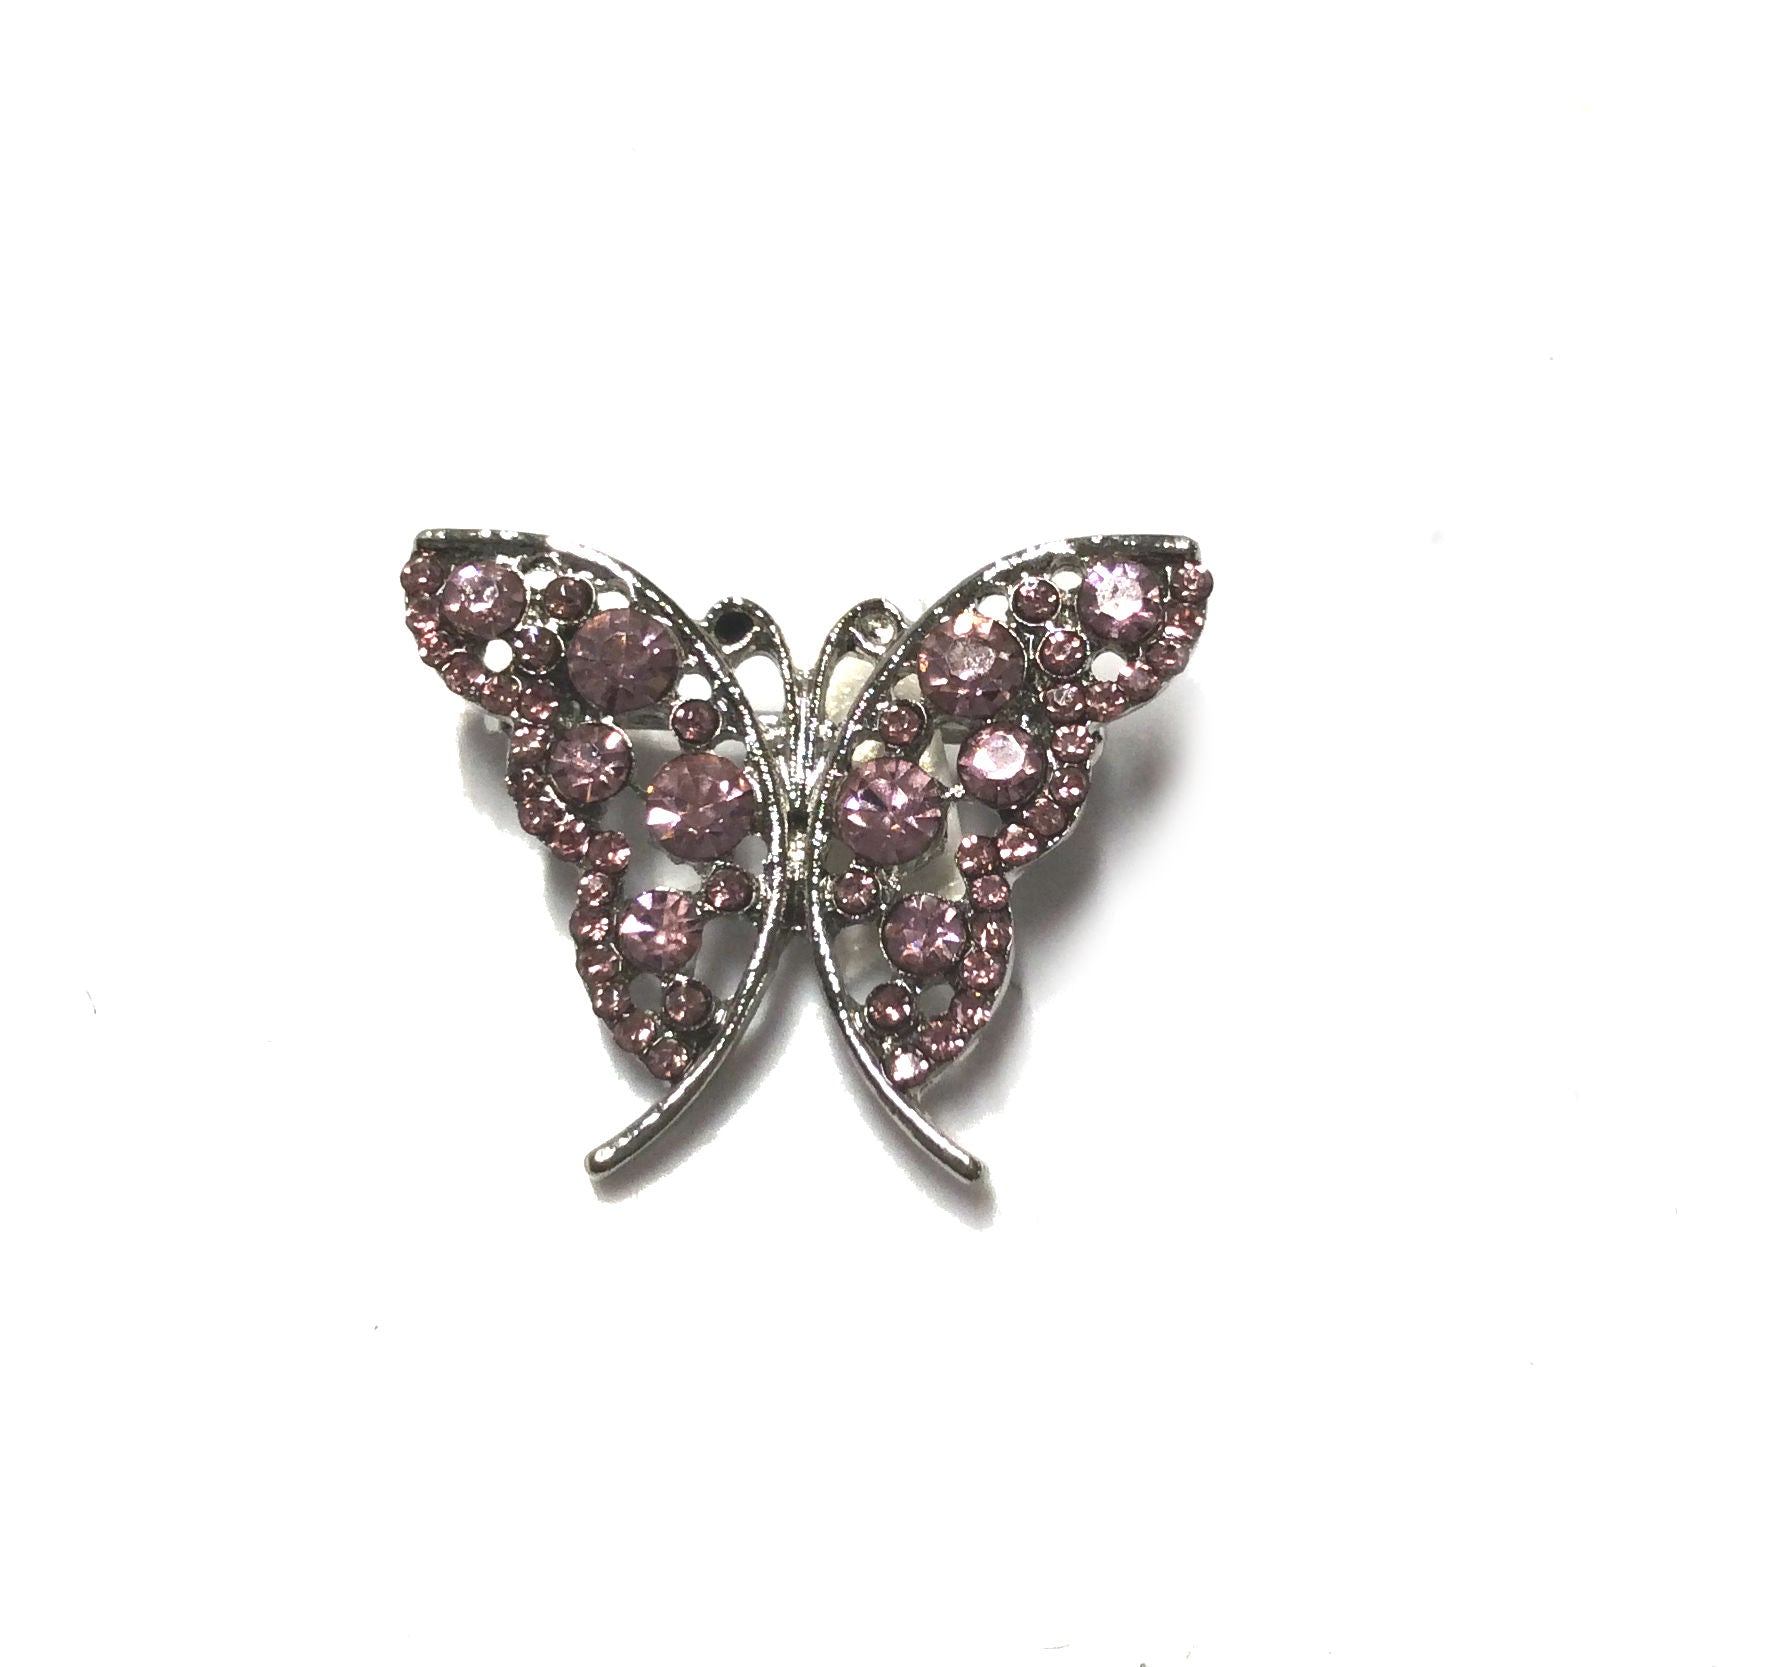 Small Butterfly Pin #28-111691PK (Pink)